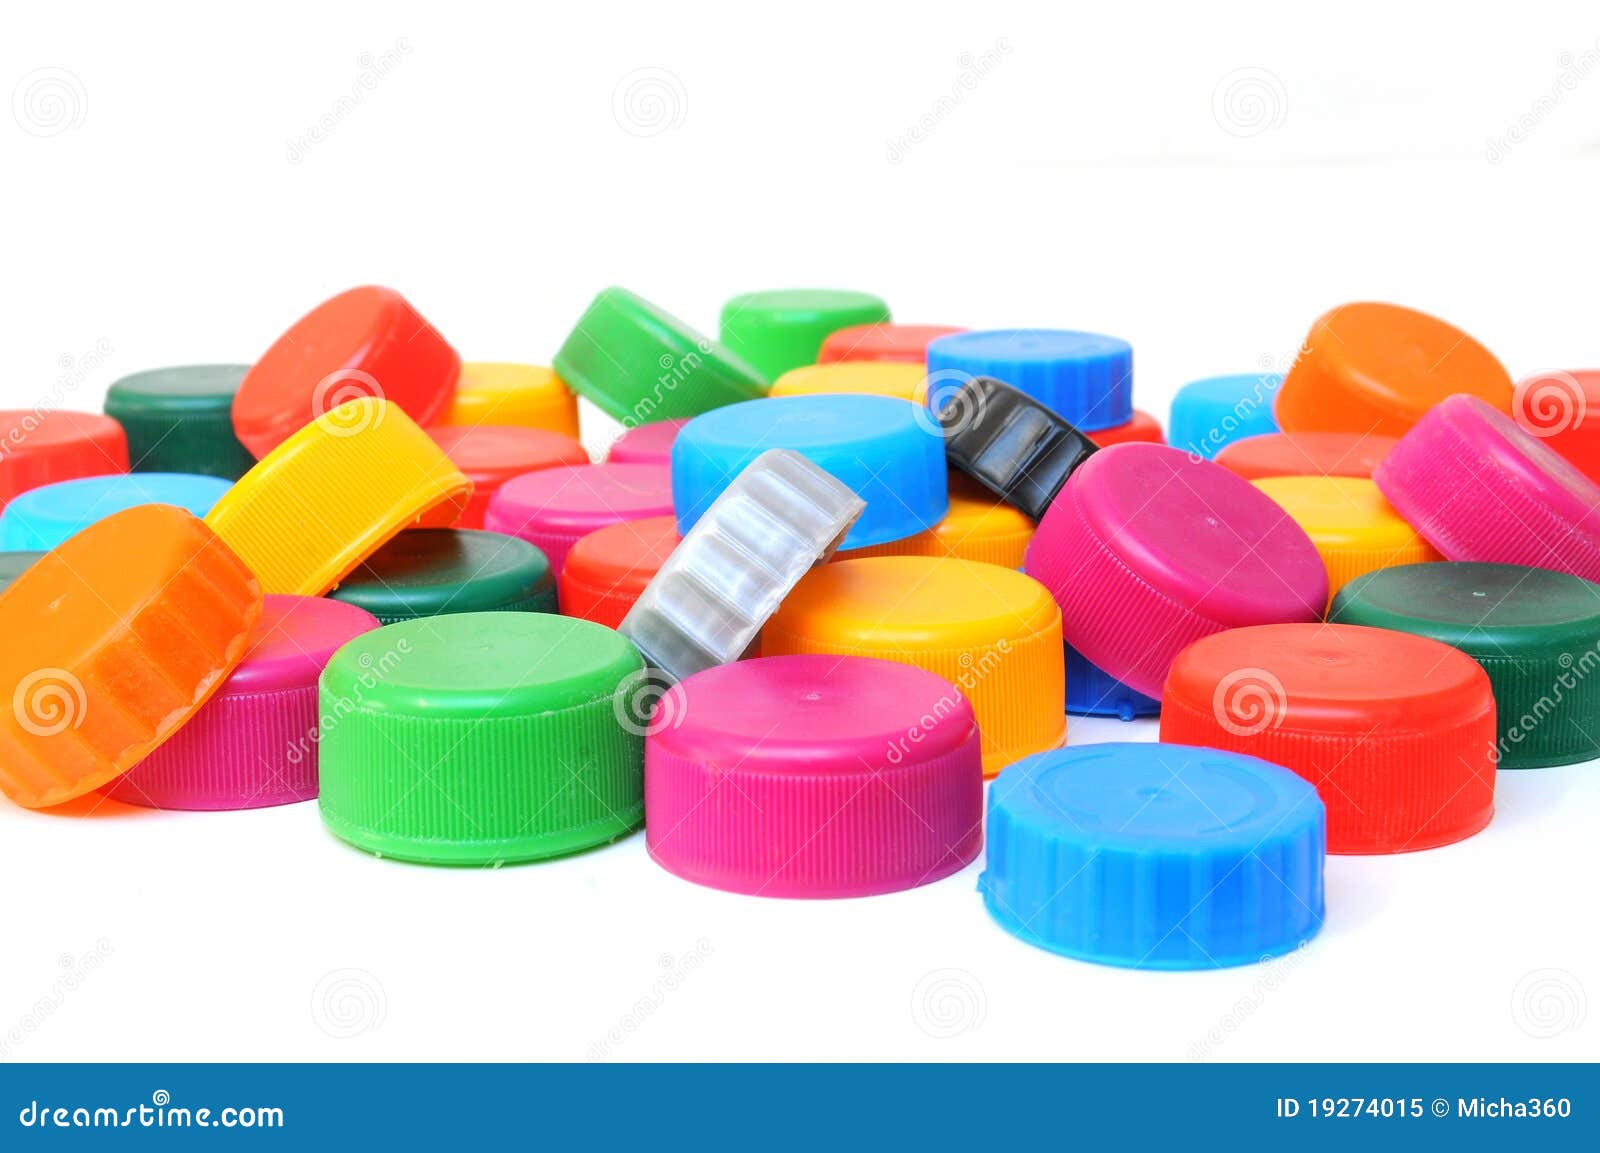 Plastic Bottle Caps In Different Colours. A Pile Of Plastic Bottle Covers.  Isolated On White Background. Stock Photo, Picture and Royalty Free Image.  Image 81597458.